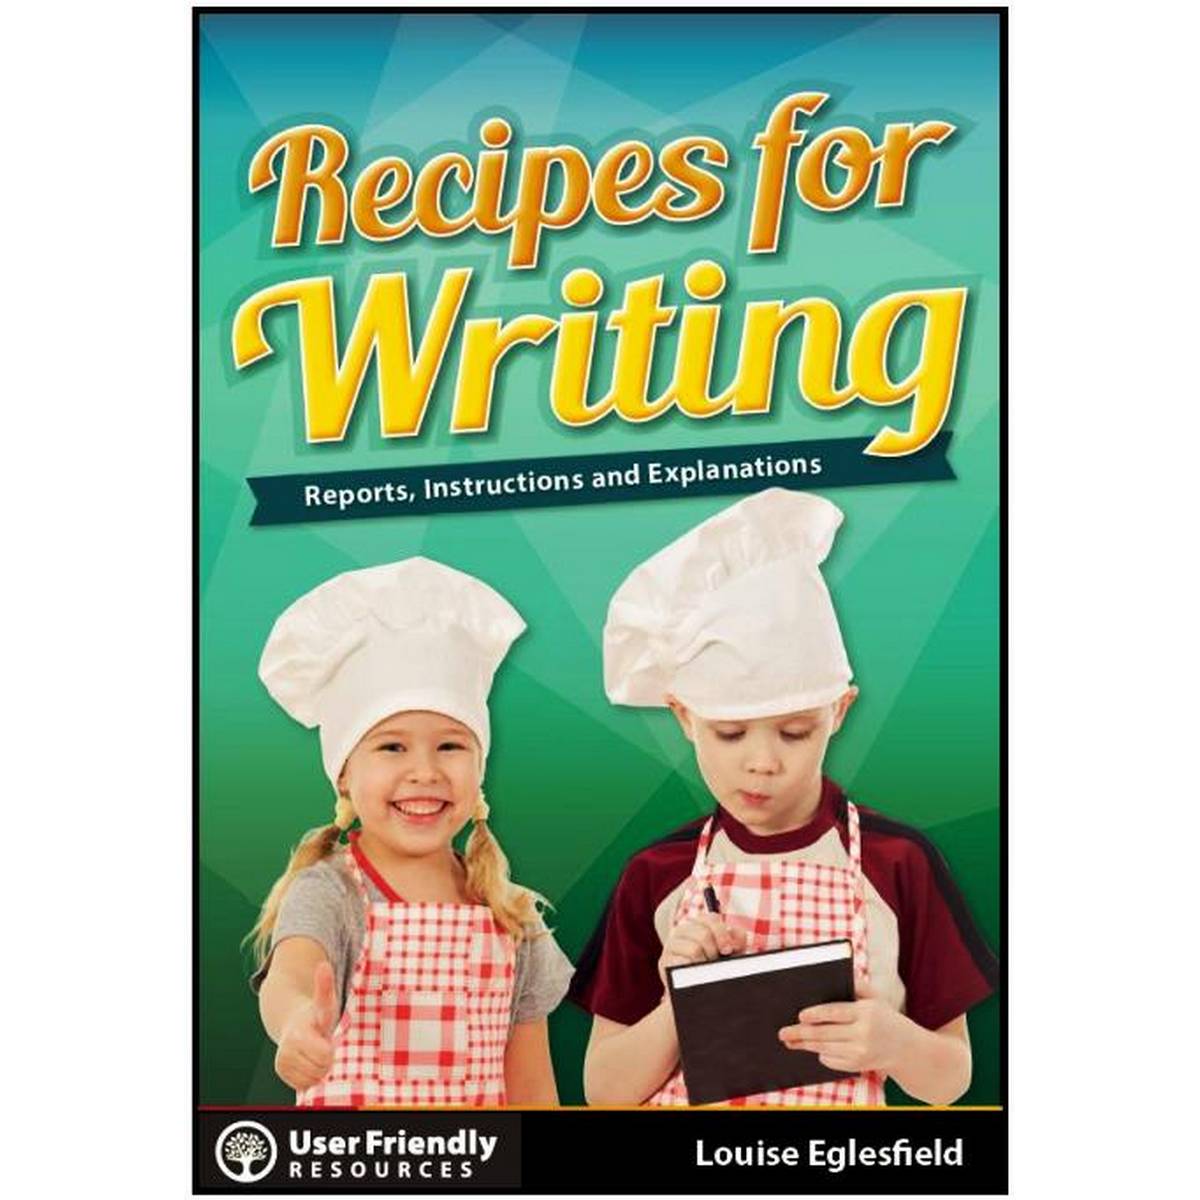 Recipes for Writing: Reports, Instructions and Explanations